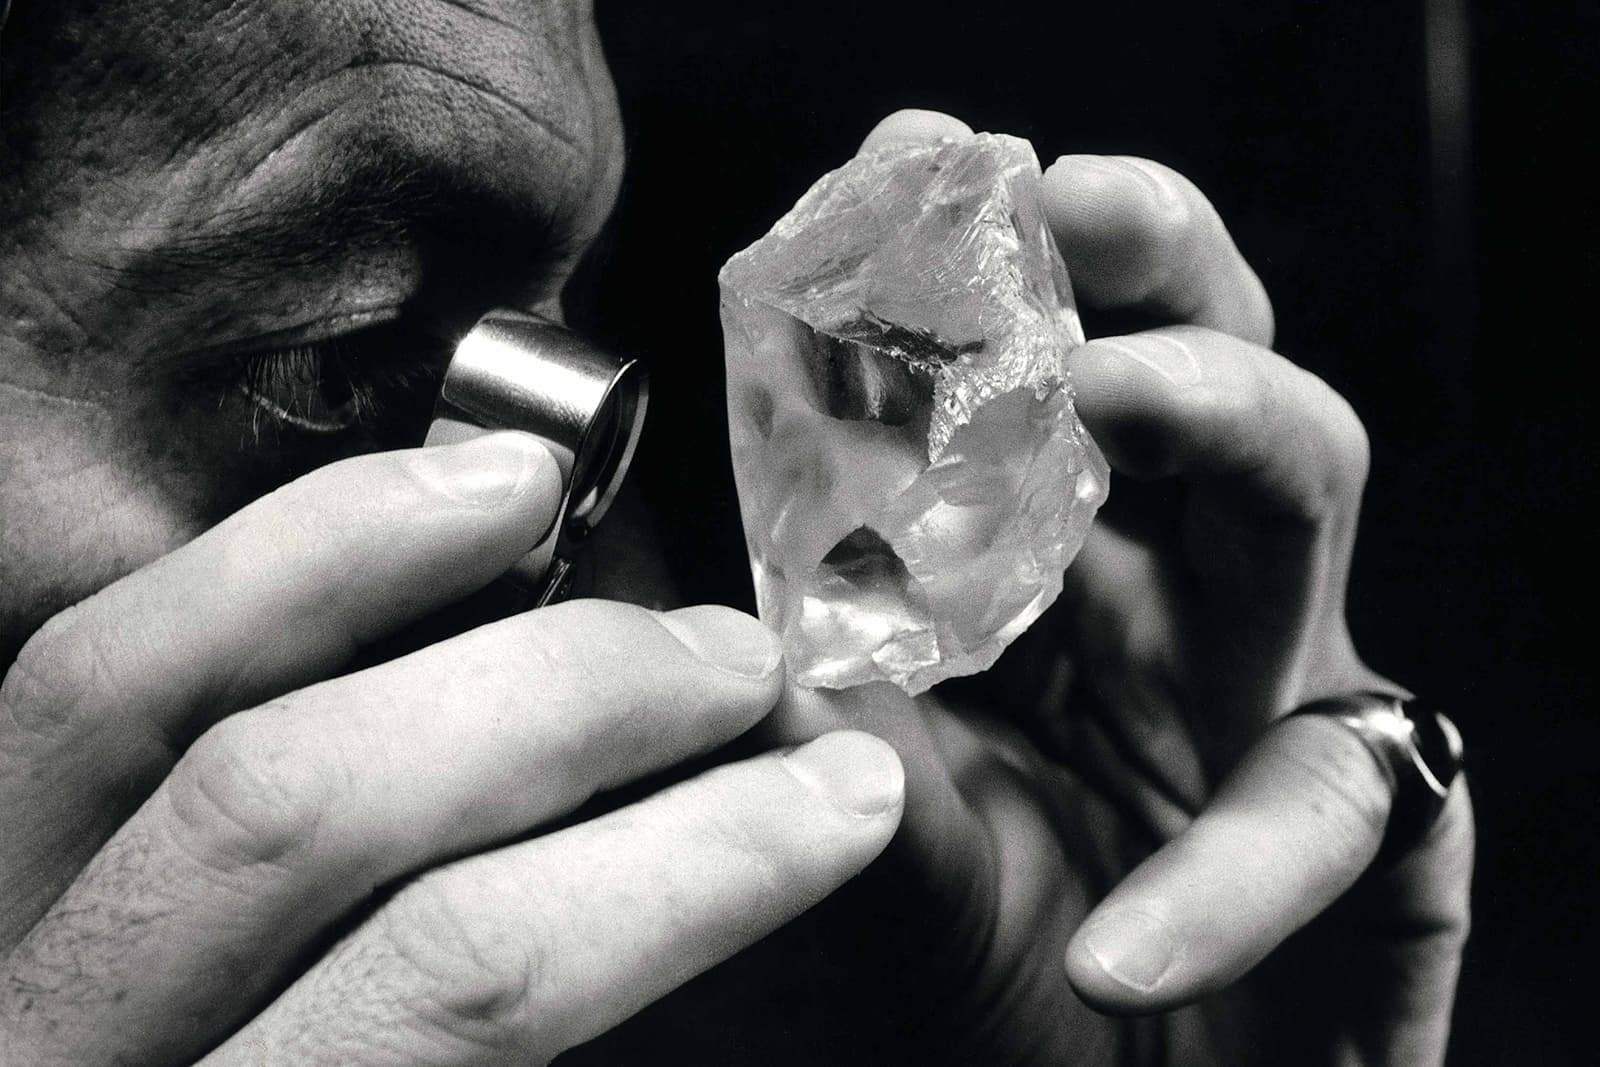 The 603 carat rough diamond known as the Lesotho Promise was acquired by Laurence Graff in 2006 